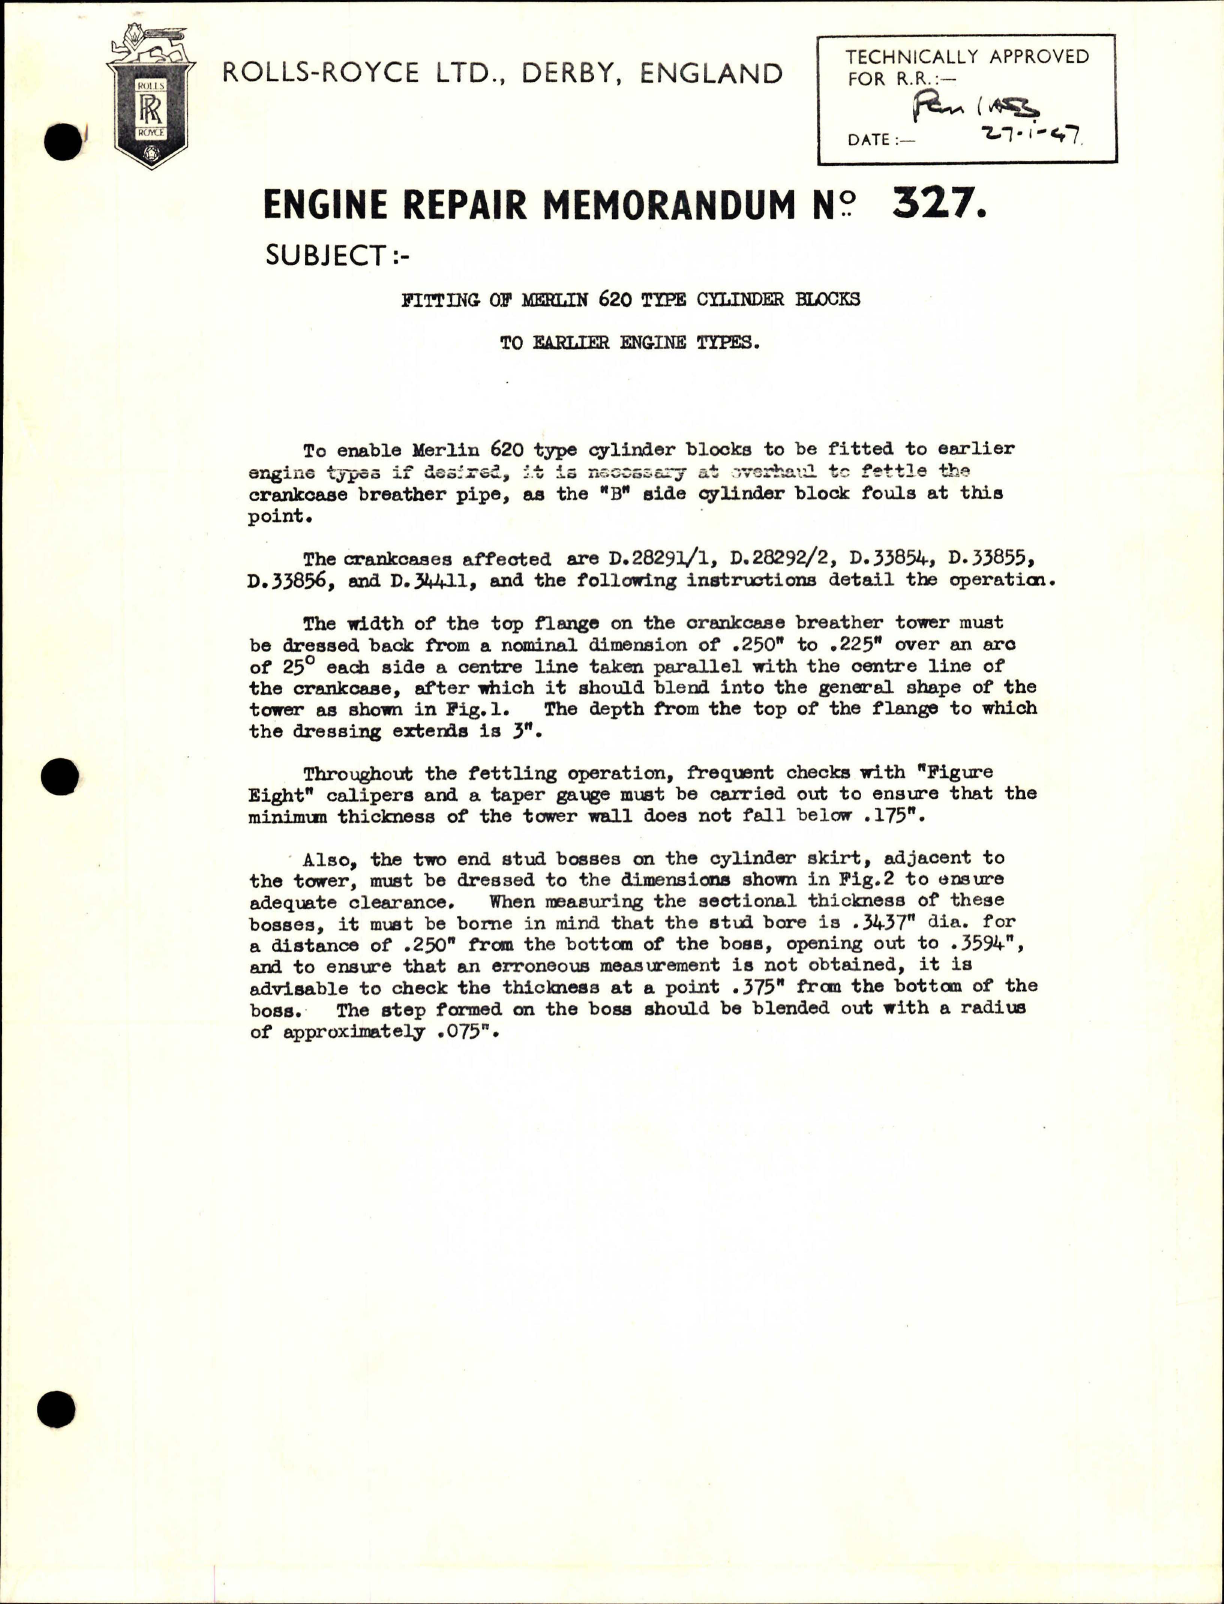 Sample page 1 from AirCorps Library document: Fitting of Merlin 620 Type Cylinder Blocks to Earlier Engine Types